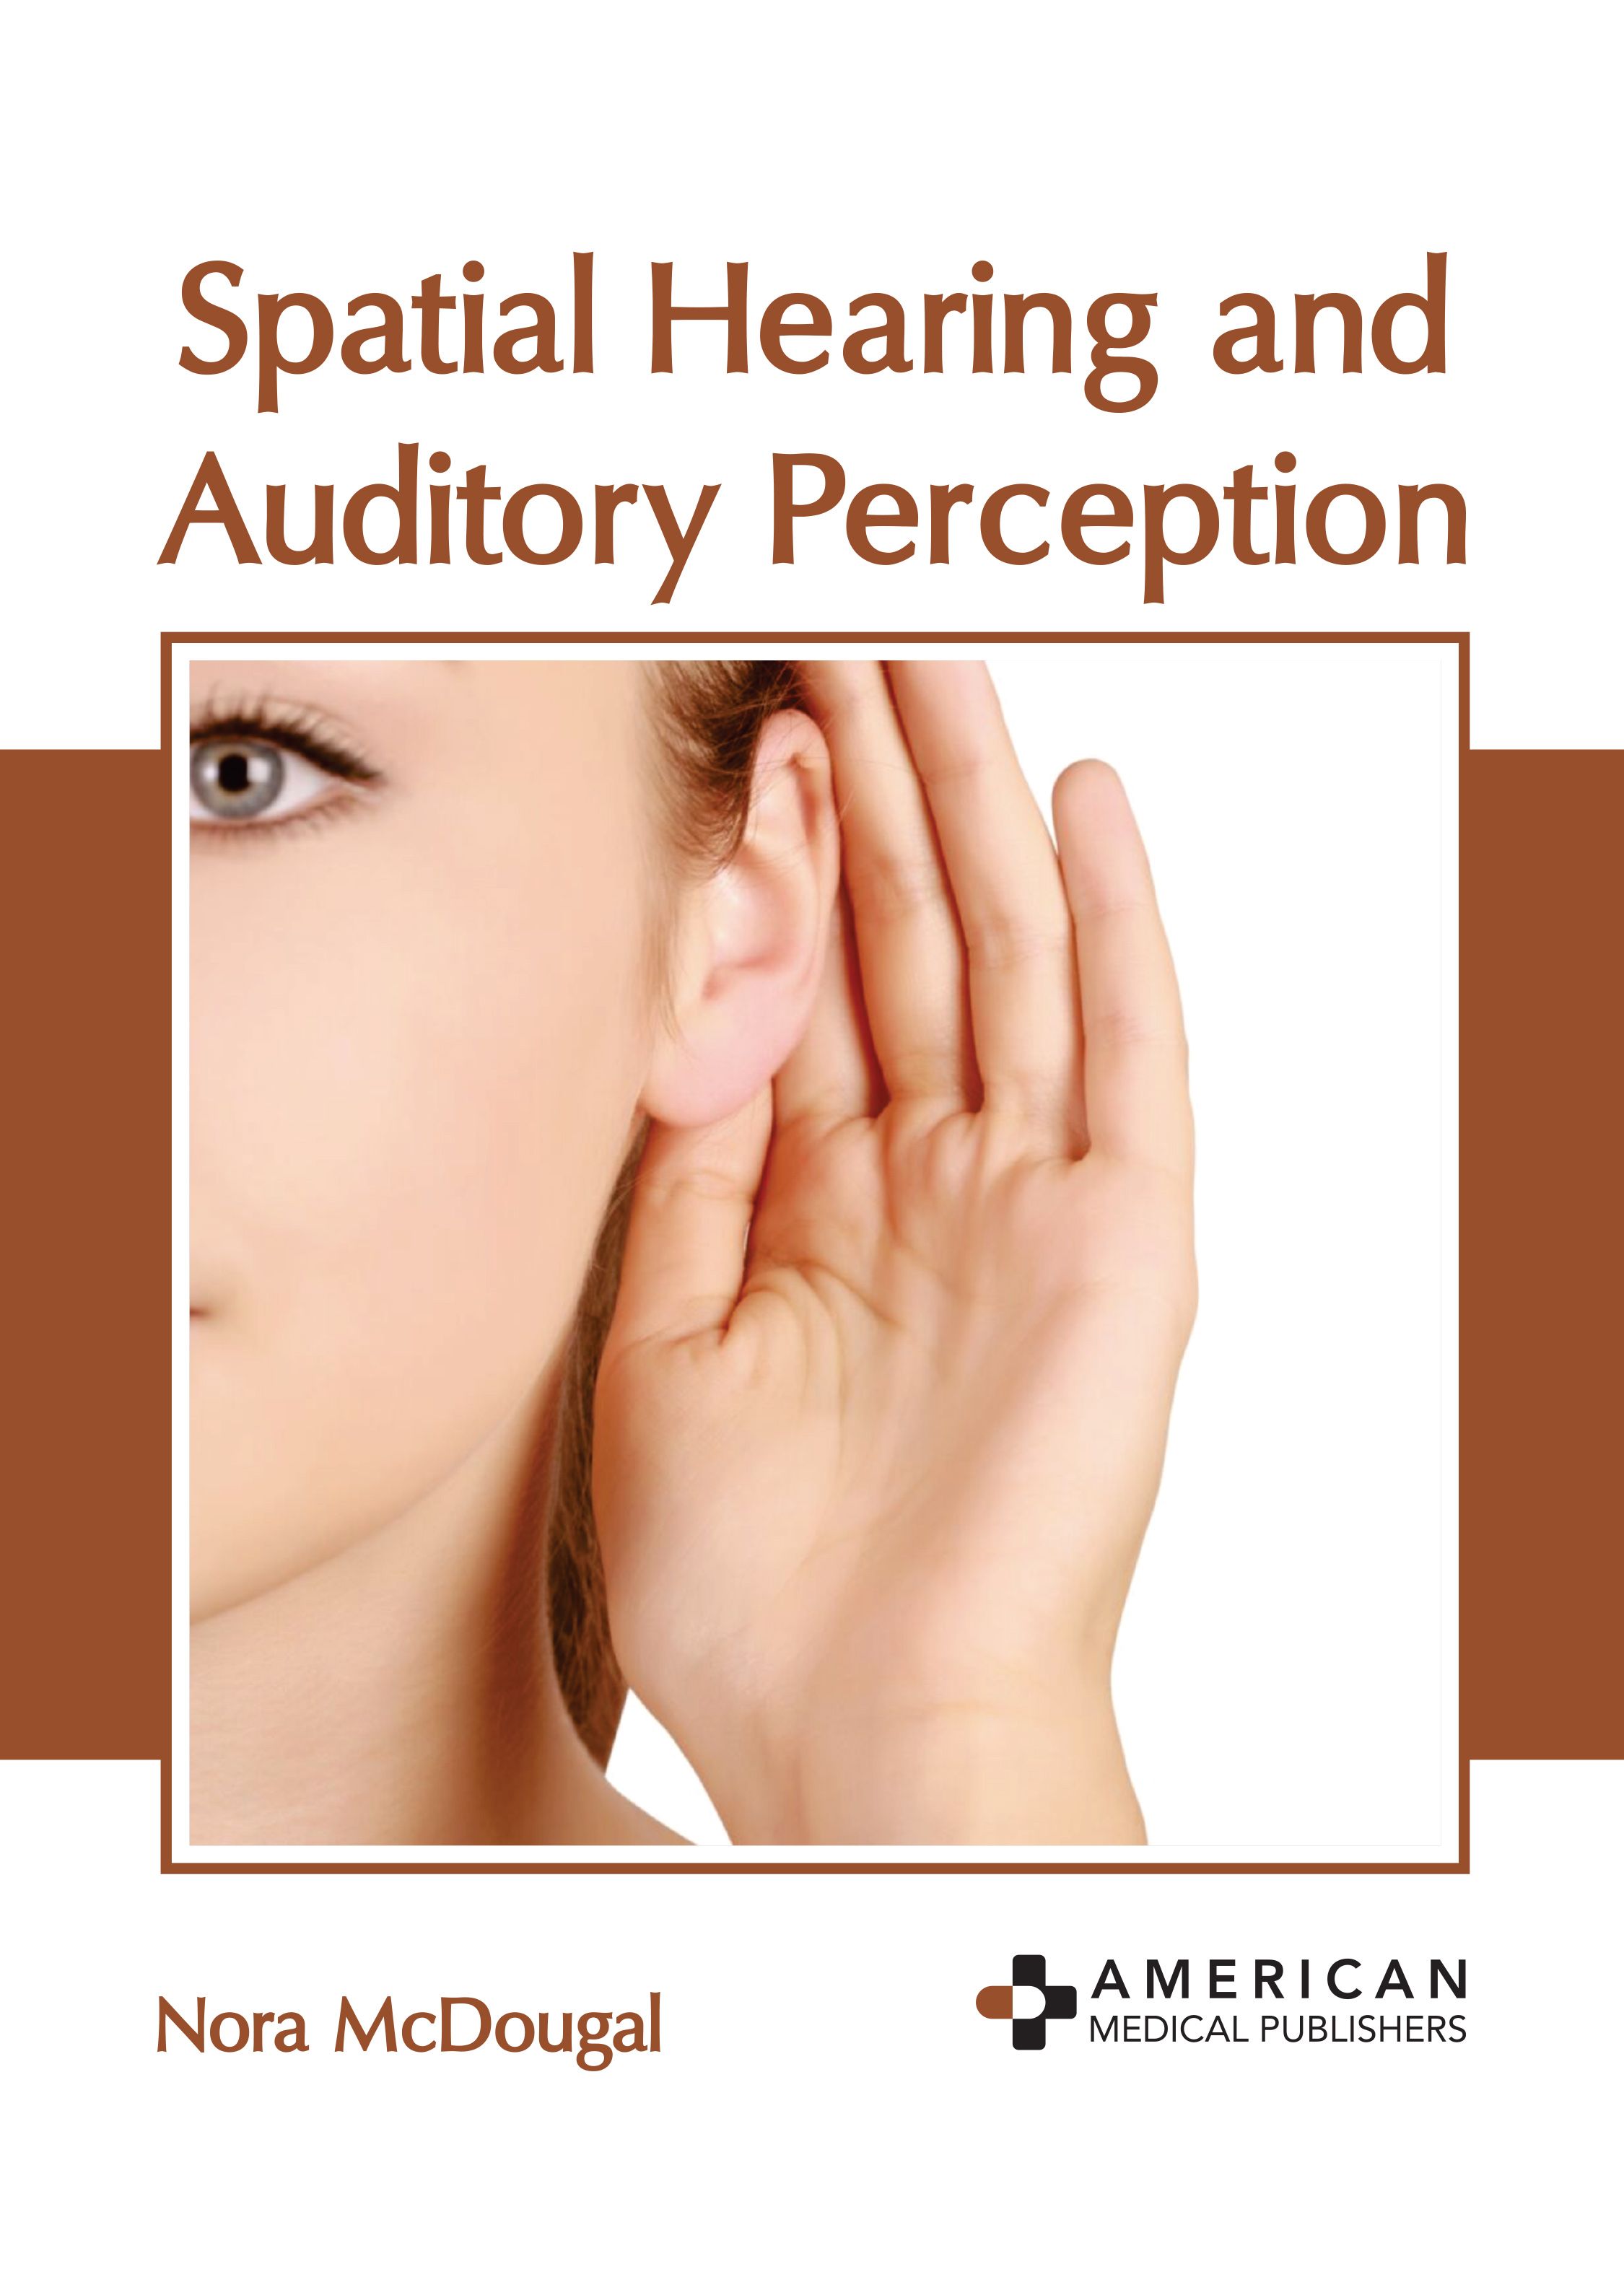 SPATIAL HEARING AND AUDITORY PERCEPTION